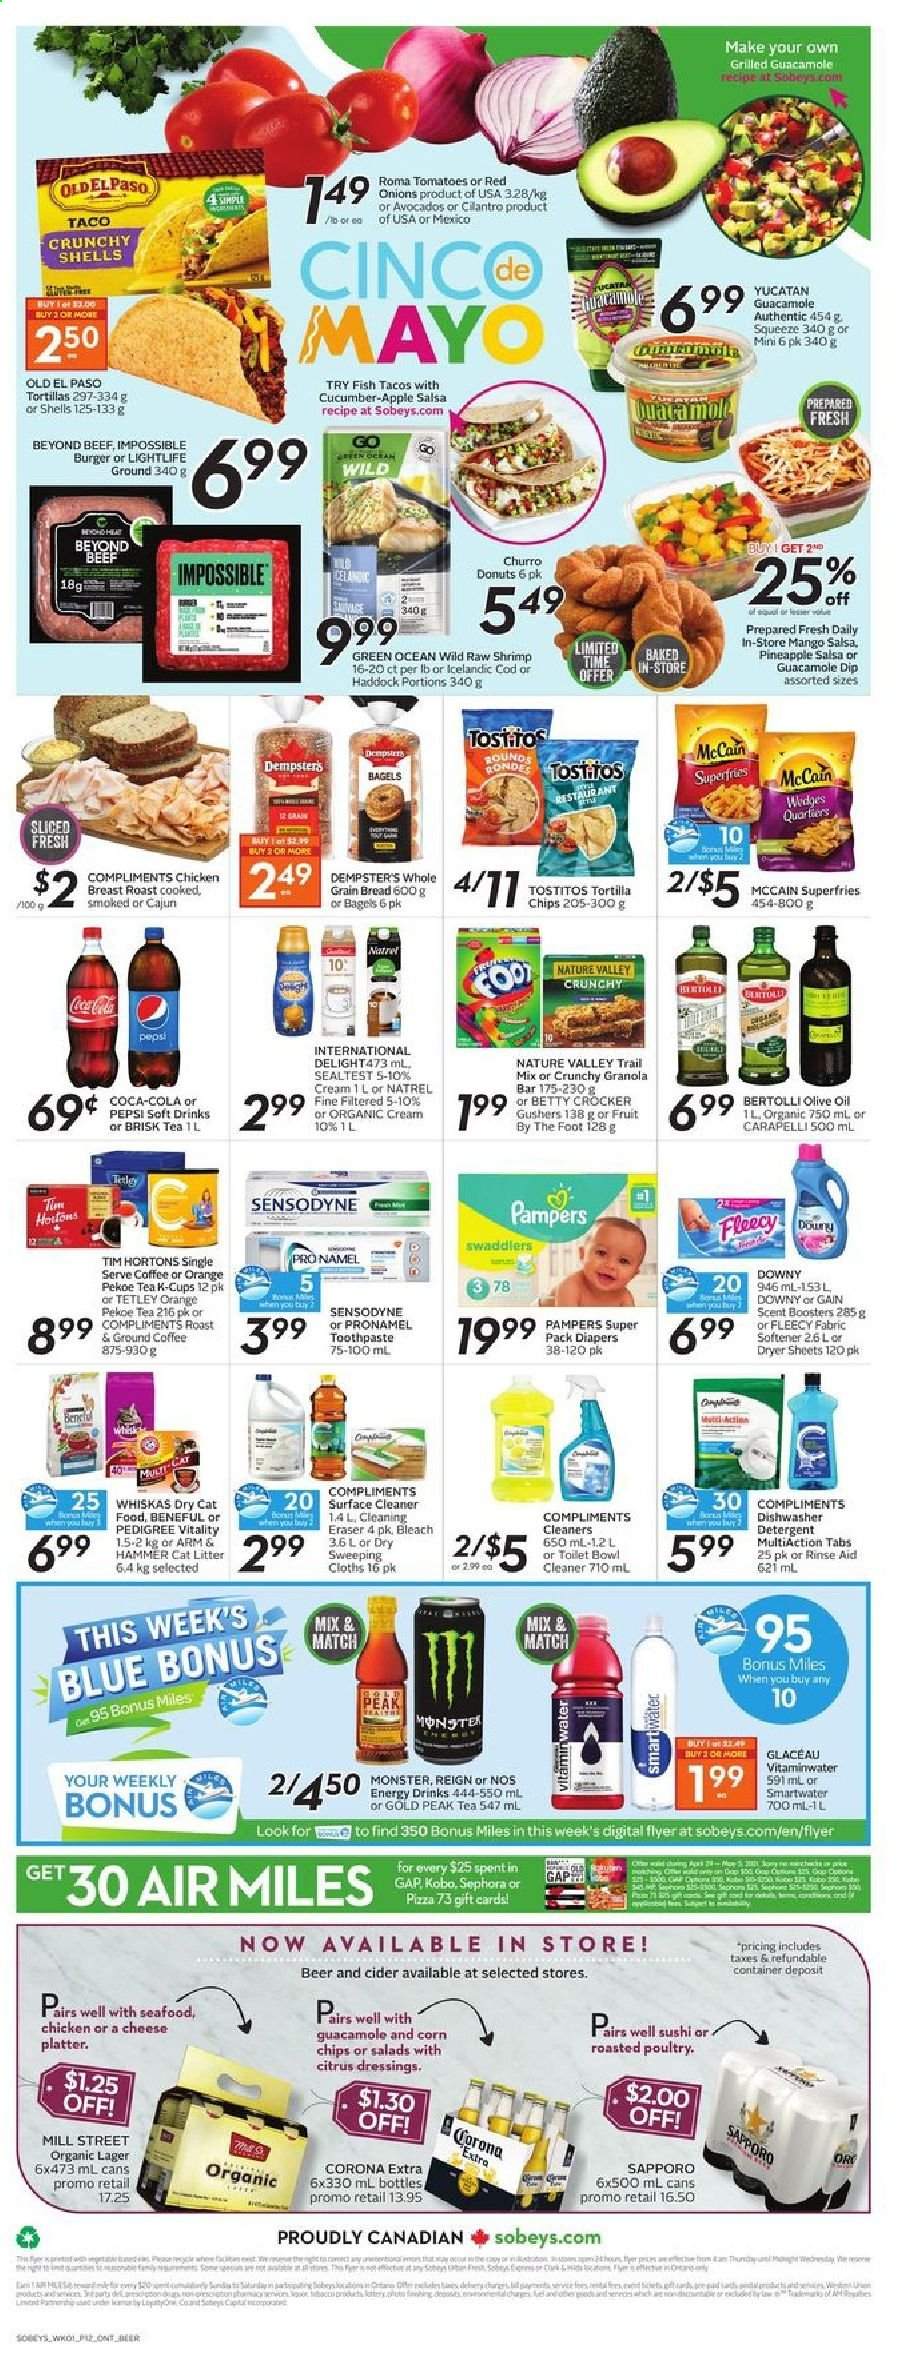 thumbnail - Sobeys Flyer - April 29, 2021 - May 05, 2021 - Sales products - bagels, bread, Old El Paso, tacos, donut, red onions, onion, pineapple, cod, haddock, fish, shrimps, pizza, hamburger, Bertolli, guacamole, mayonnaise, McCain, potato fries, tortilla chips, corn chips, Tostitos, ARM & HAMMER, granola bar, Nature Valley, cilantro, salsa, olive oil, oil, trail mix, Coca-Cola, Pepsi, energy drink, Monster, soft drink, Gold Peak Tea, Smartwater, tea, coffee, ground coffee, coffee capsules, L'Or, K-Cups, cider, beer, Corona Extra, Lager, chicken breasts, chicken, nappies, surface cleaner, cleaner, bleach, fabric softener, dryer sheets, scent booster, toothpaste, cat litter, animal food, cat food, Pedigree, dry cat food, granola, Pampers, chips, Sensodyne. Page 12.